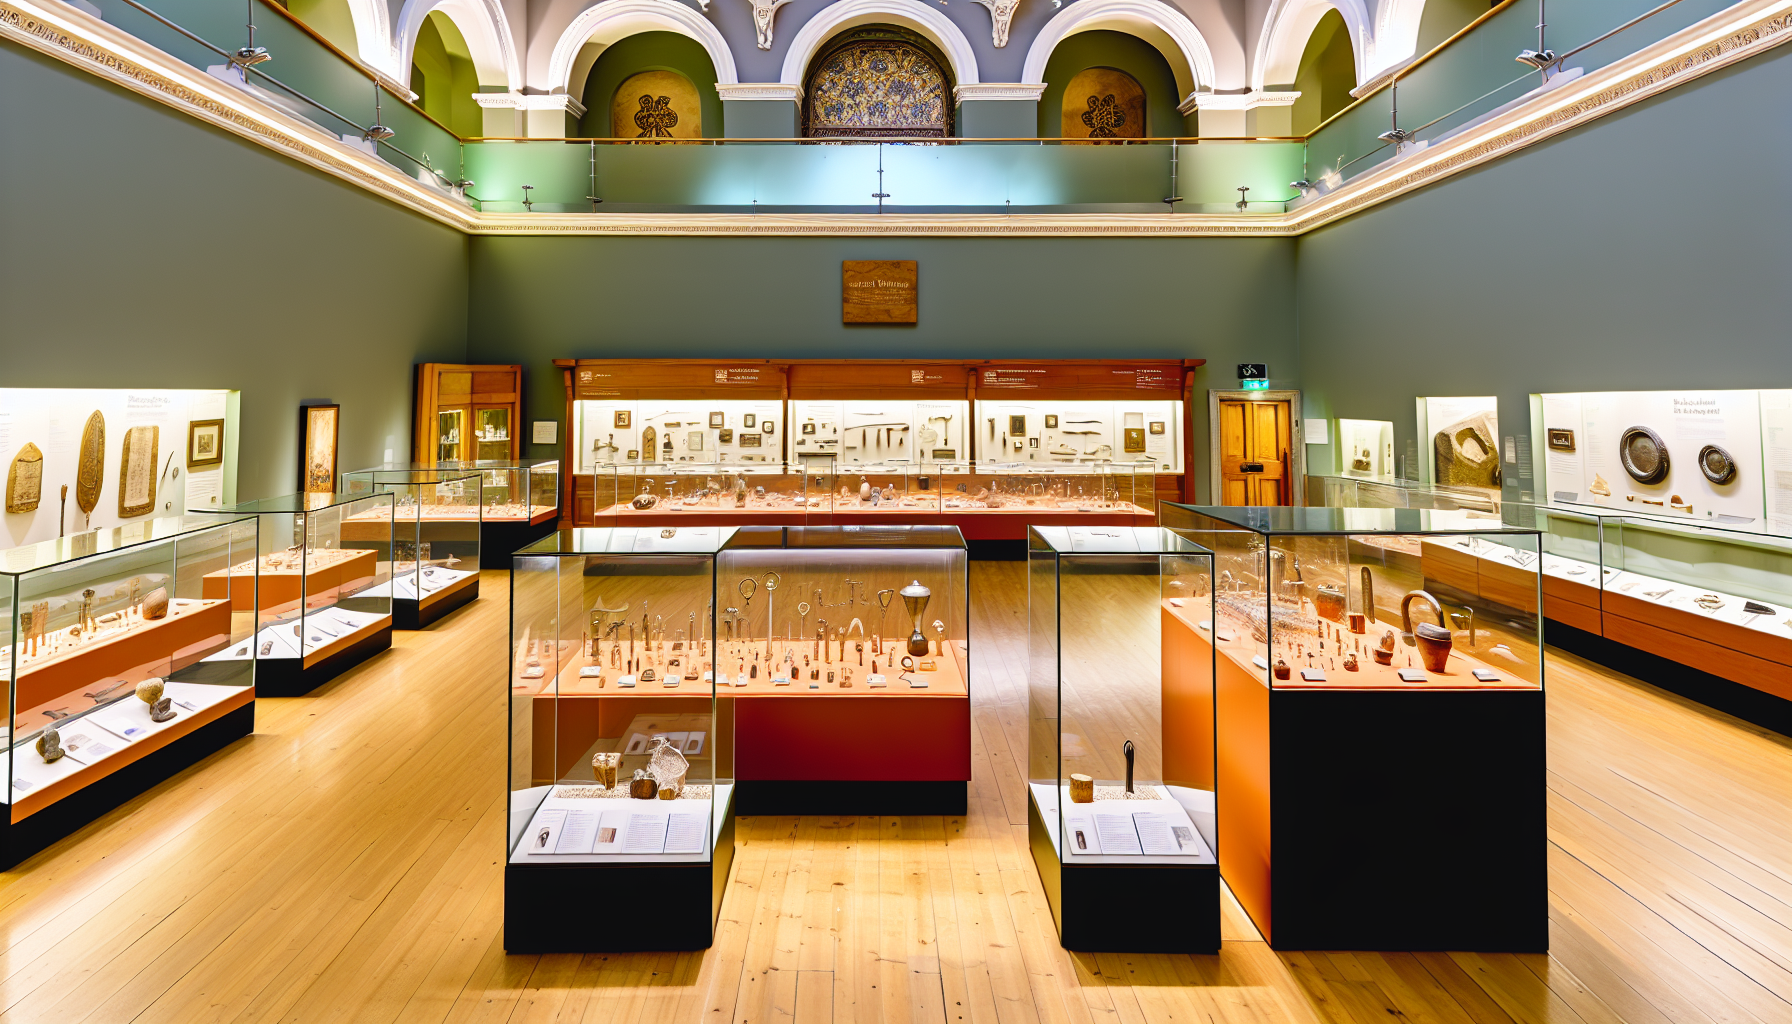 National Museum of Ireland exhibition hall with historical artifacts